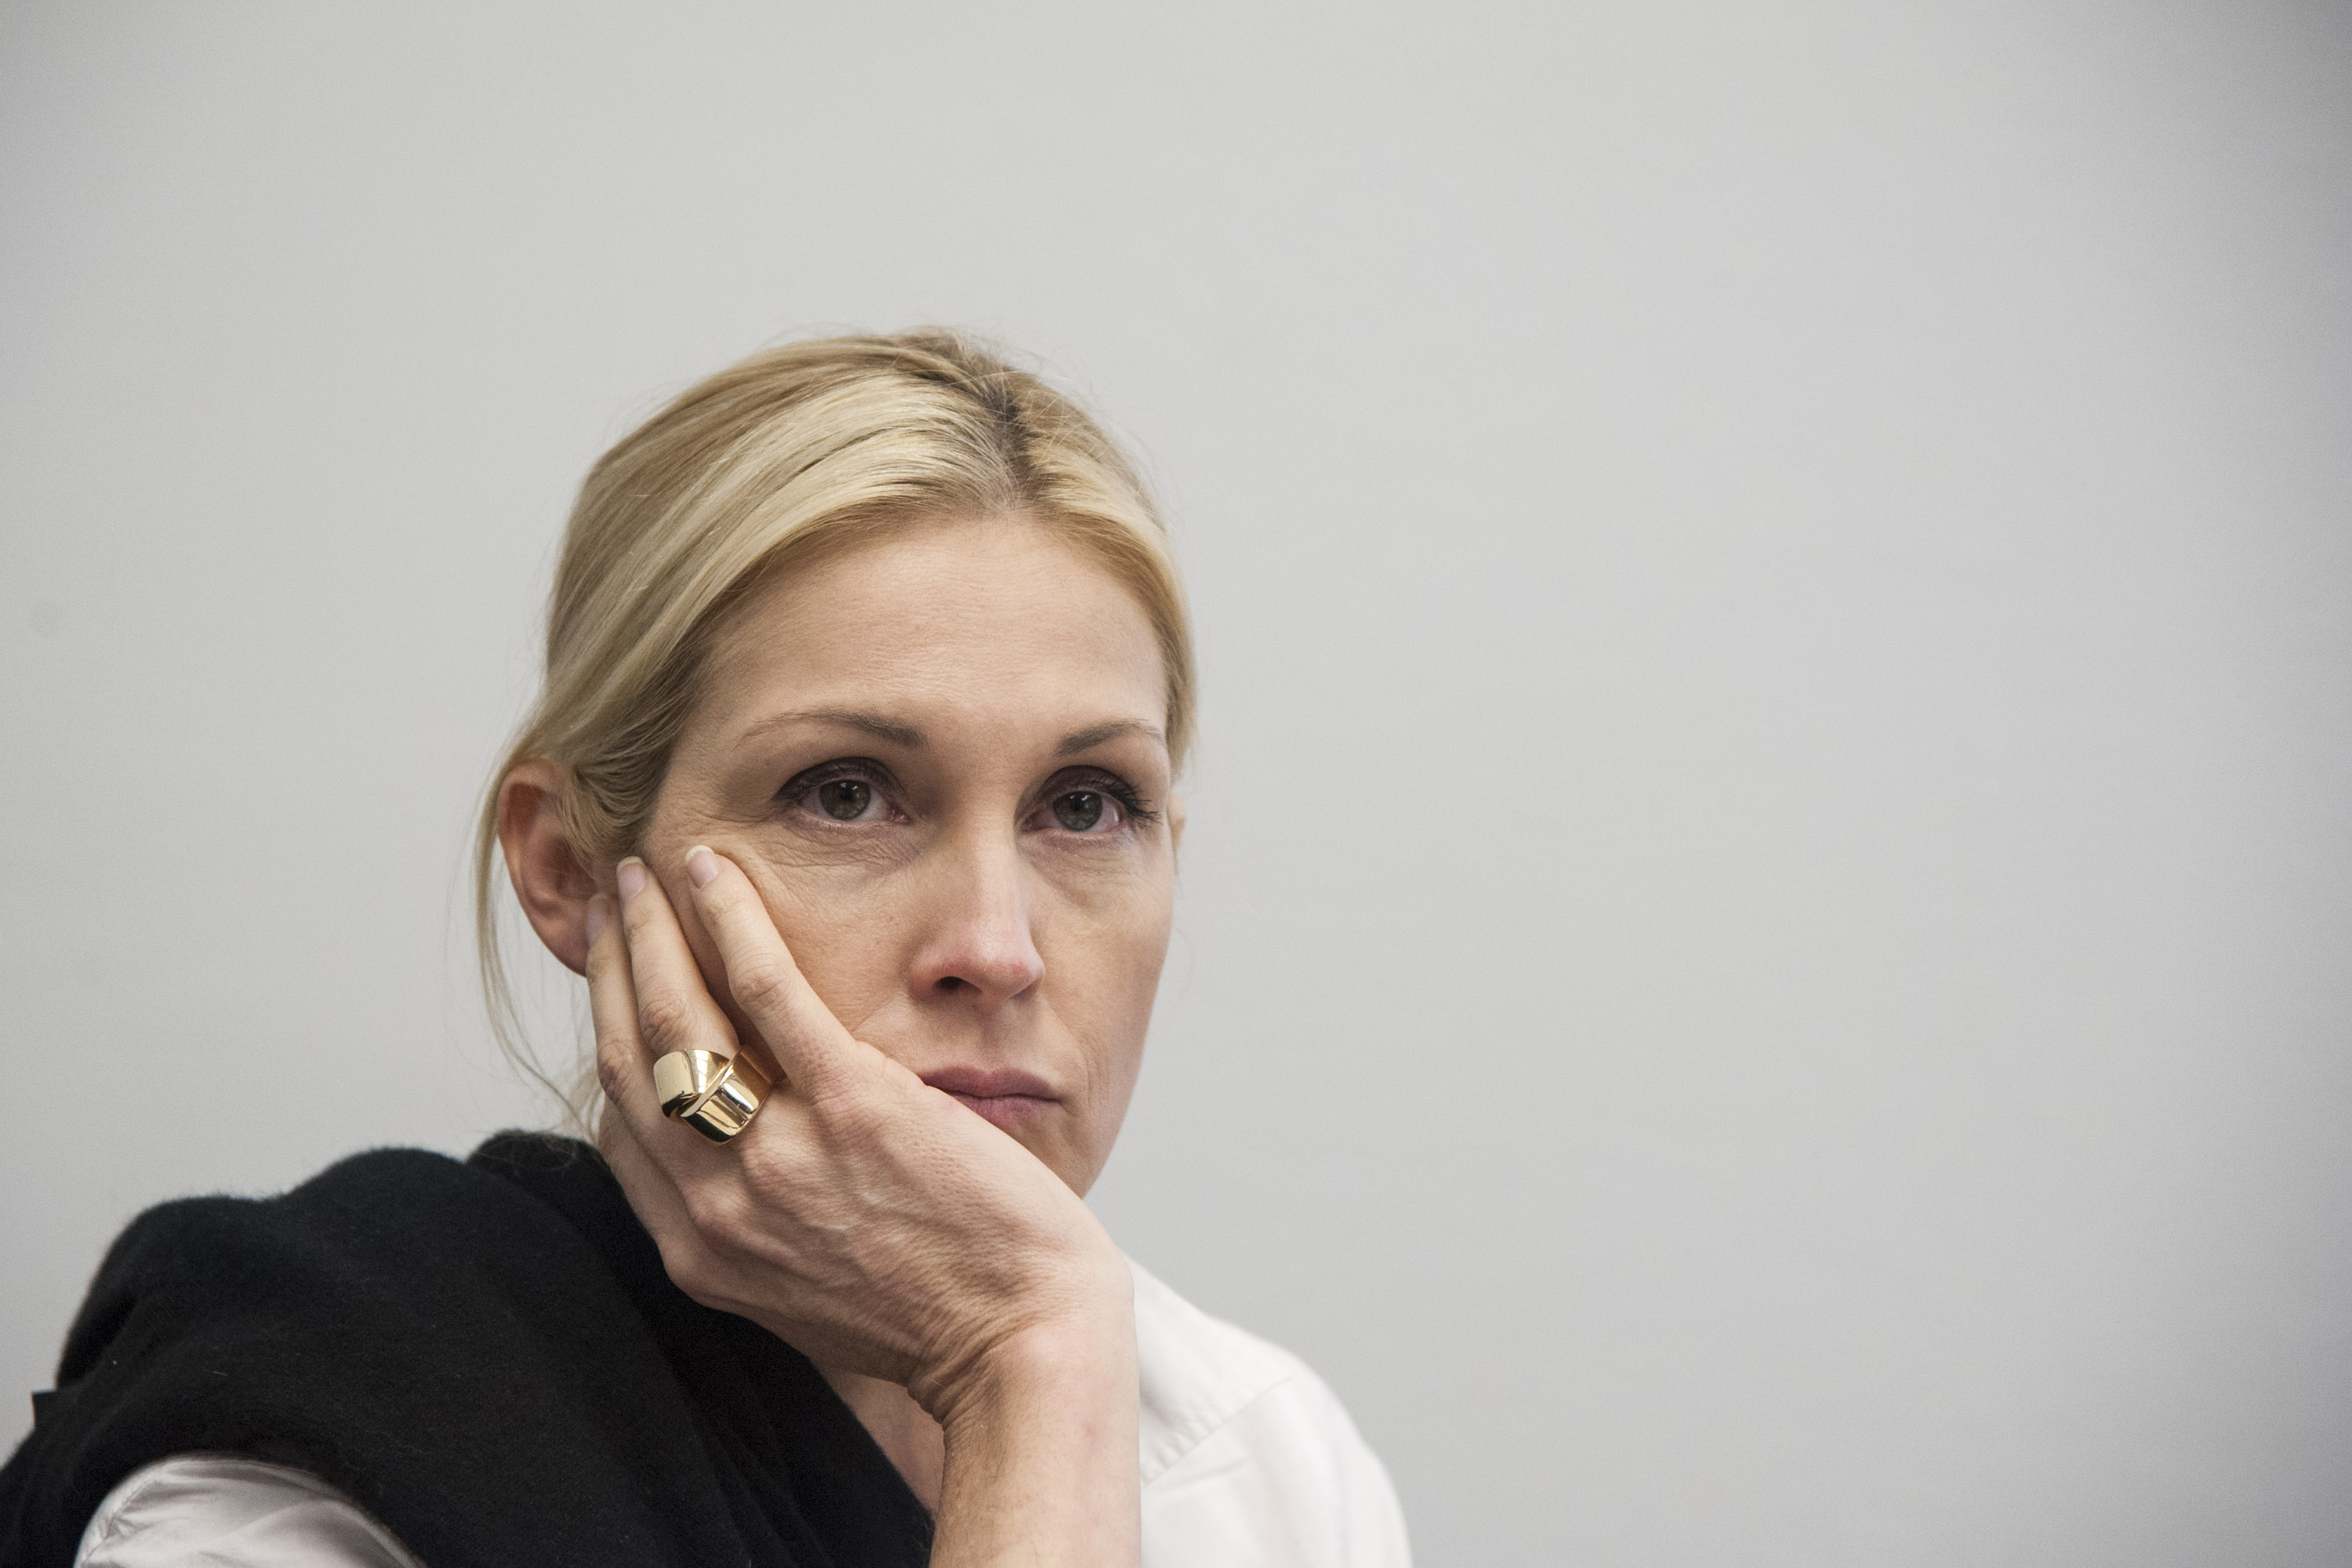 Kelly Rutherford speaks during a Capitol Hill briefing in the Cannon House Office Building on June 25, 2015, in Washington DC. | Source: Getty Images